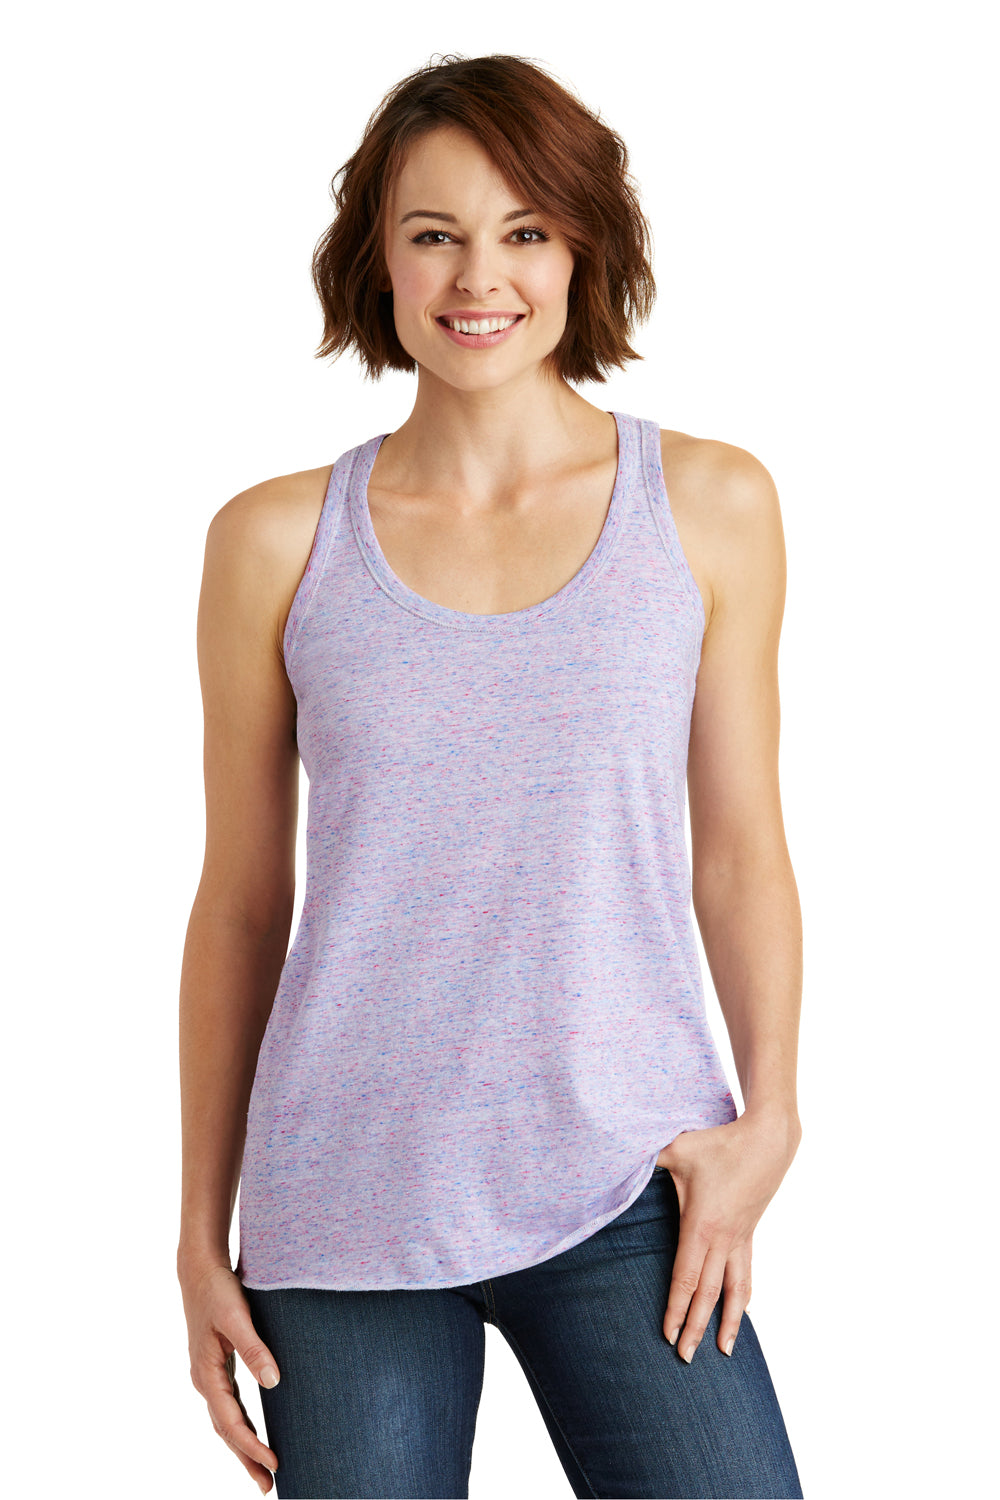 District DM466 Womens Cosmic Tank Top White/Pink Front